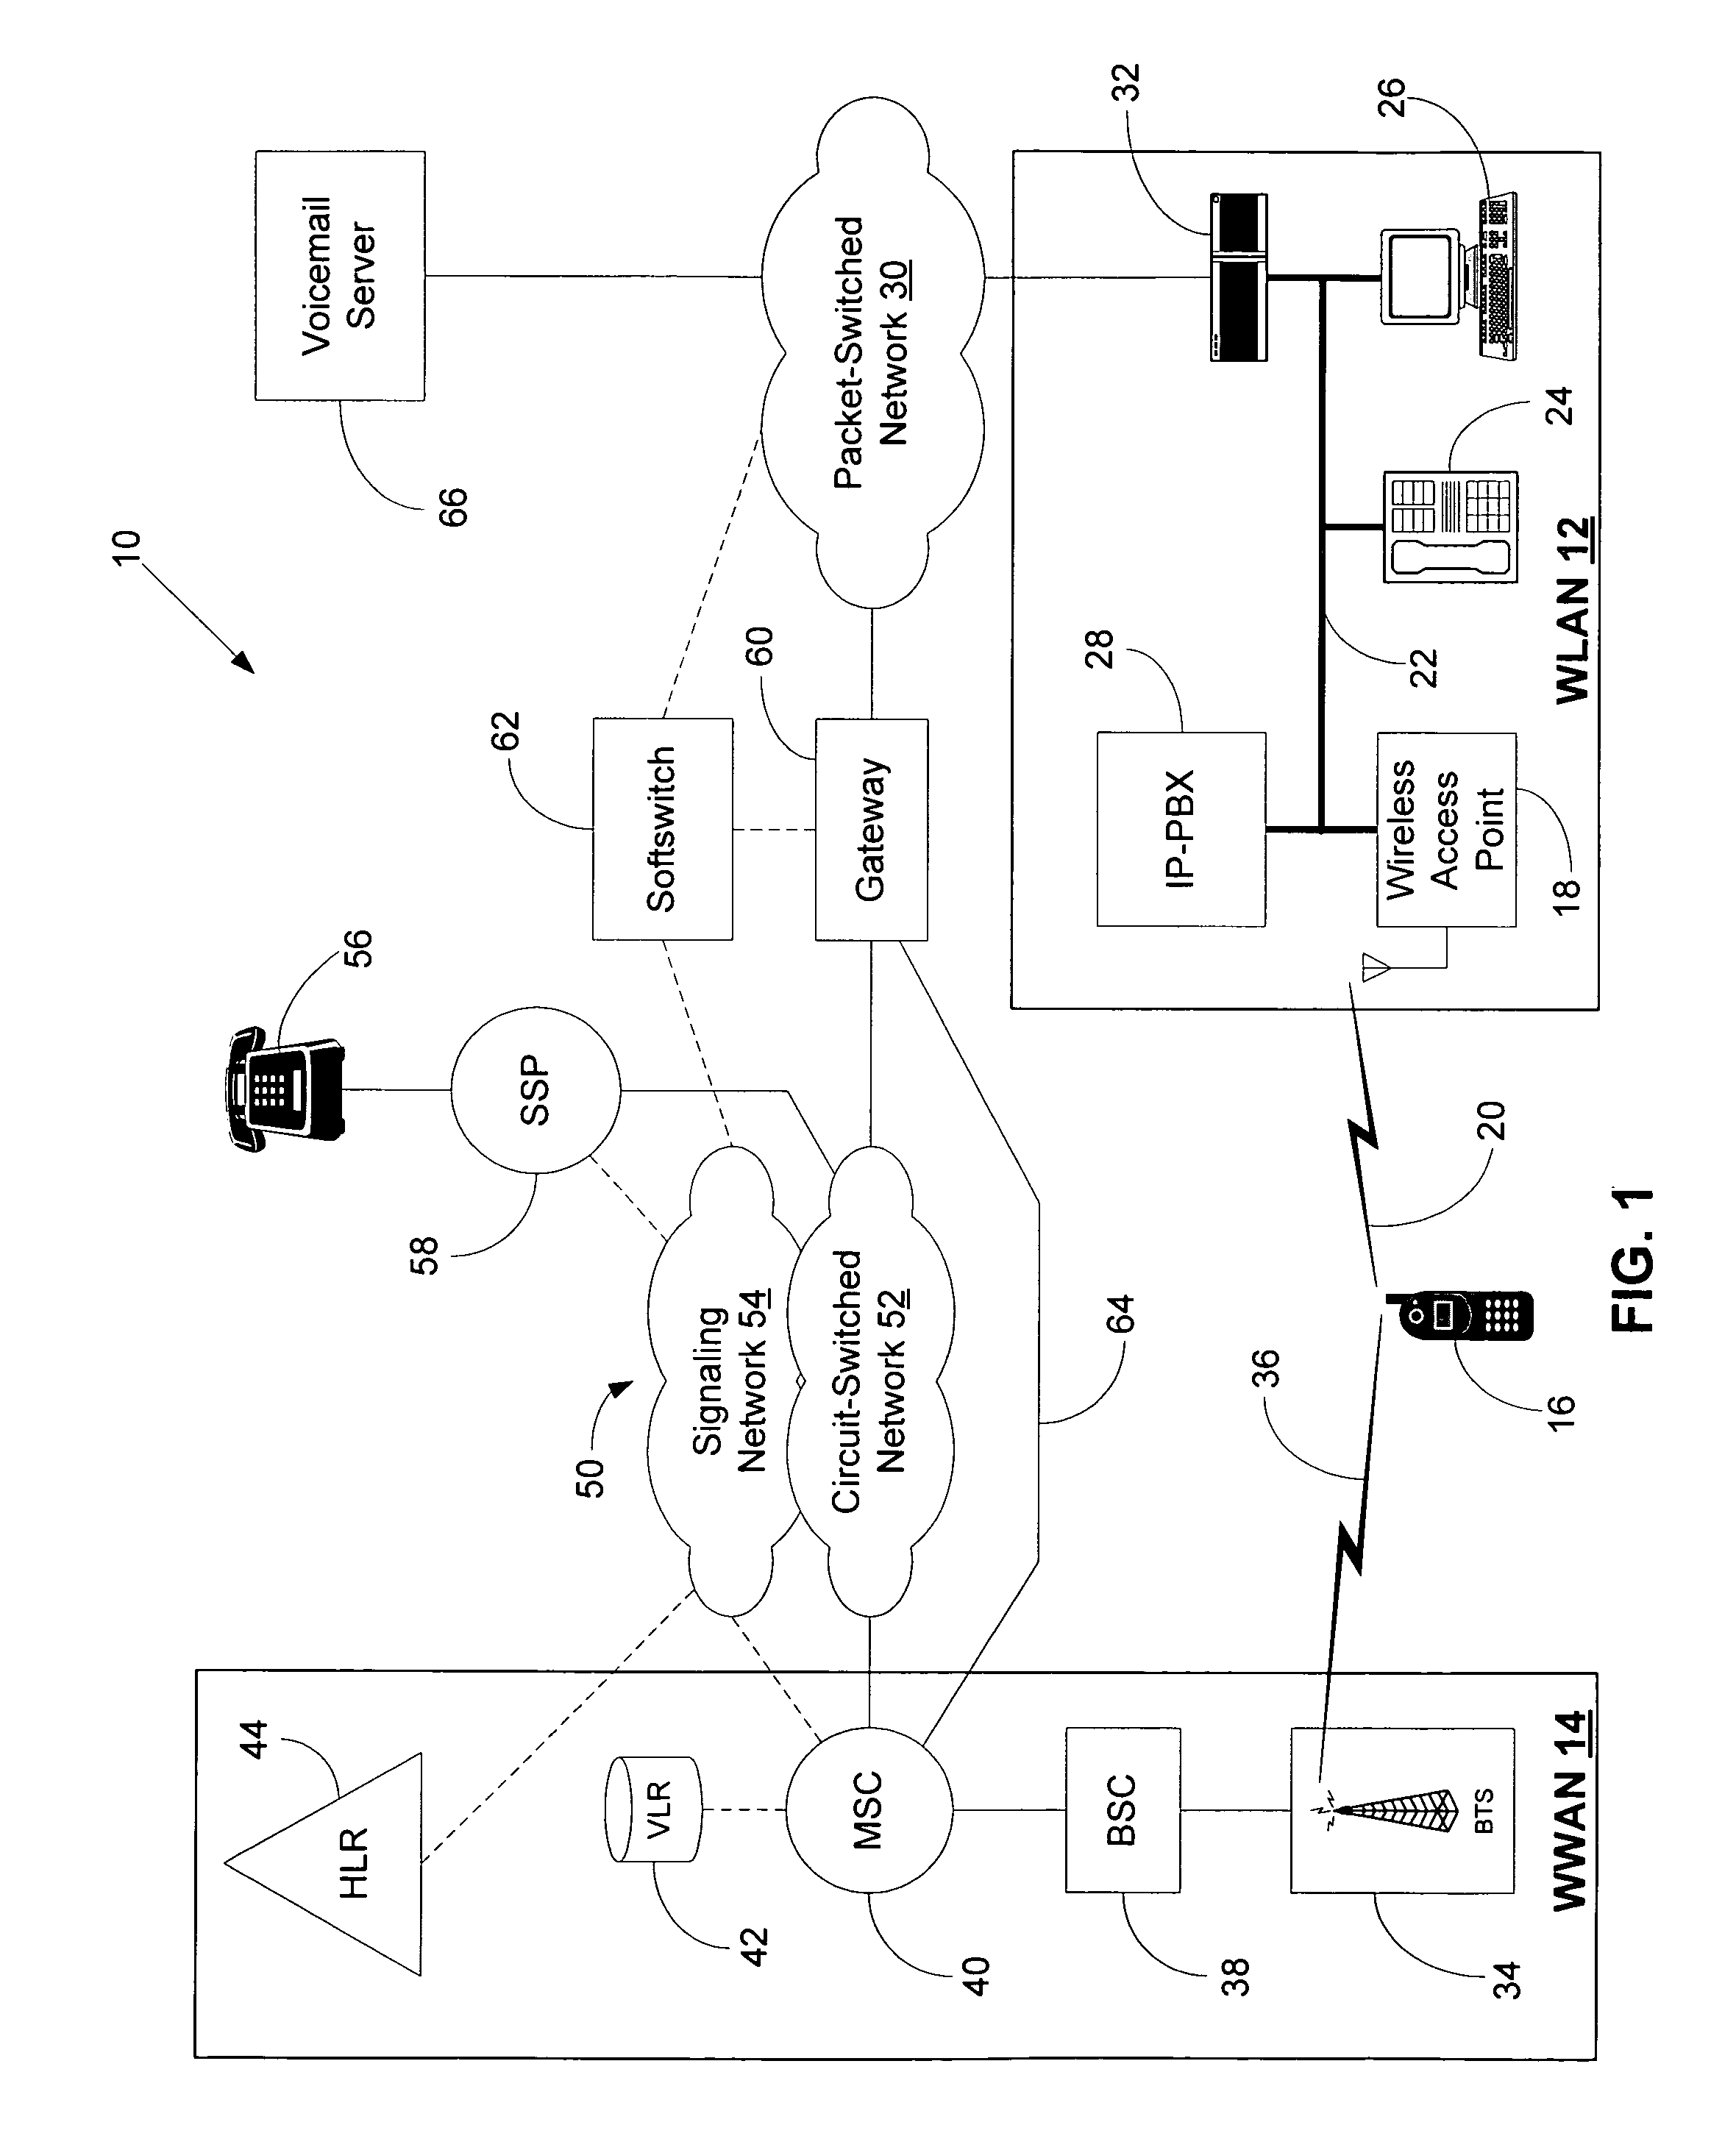 Method and system for notifying a multi-mode mobile station of an incoming call